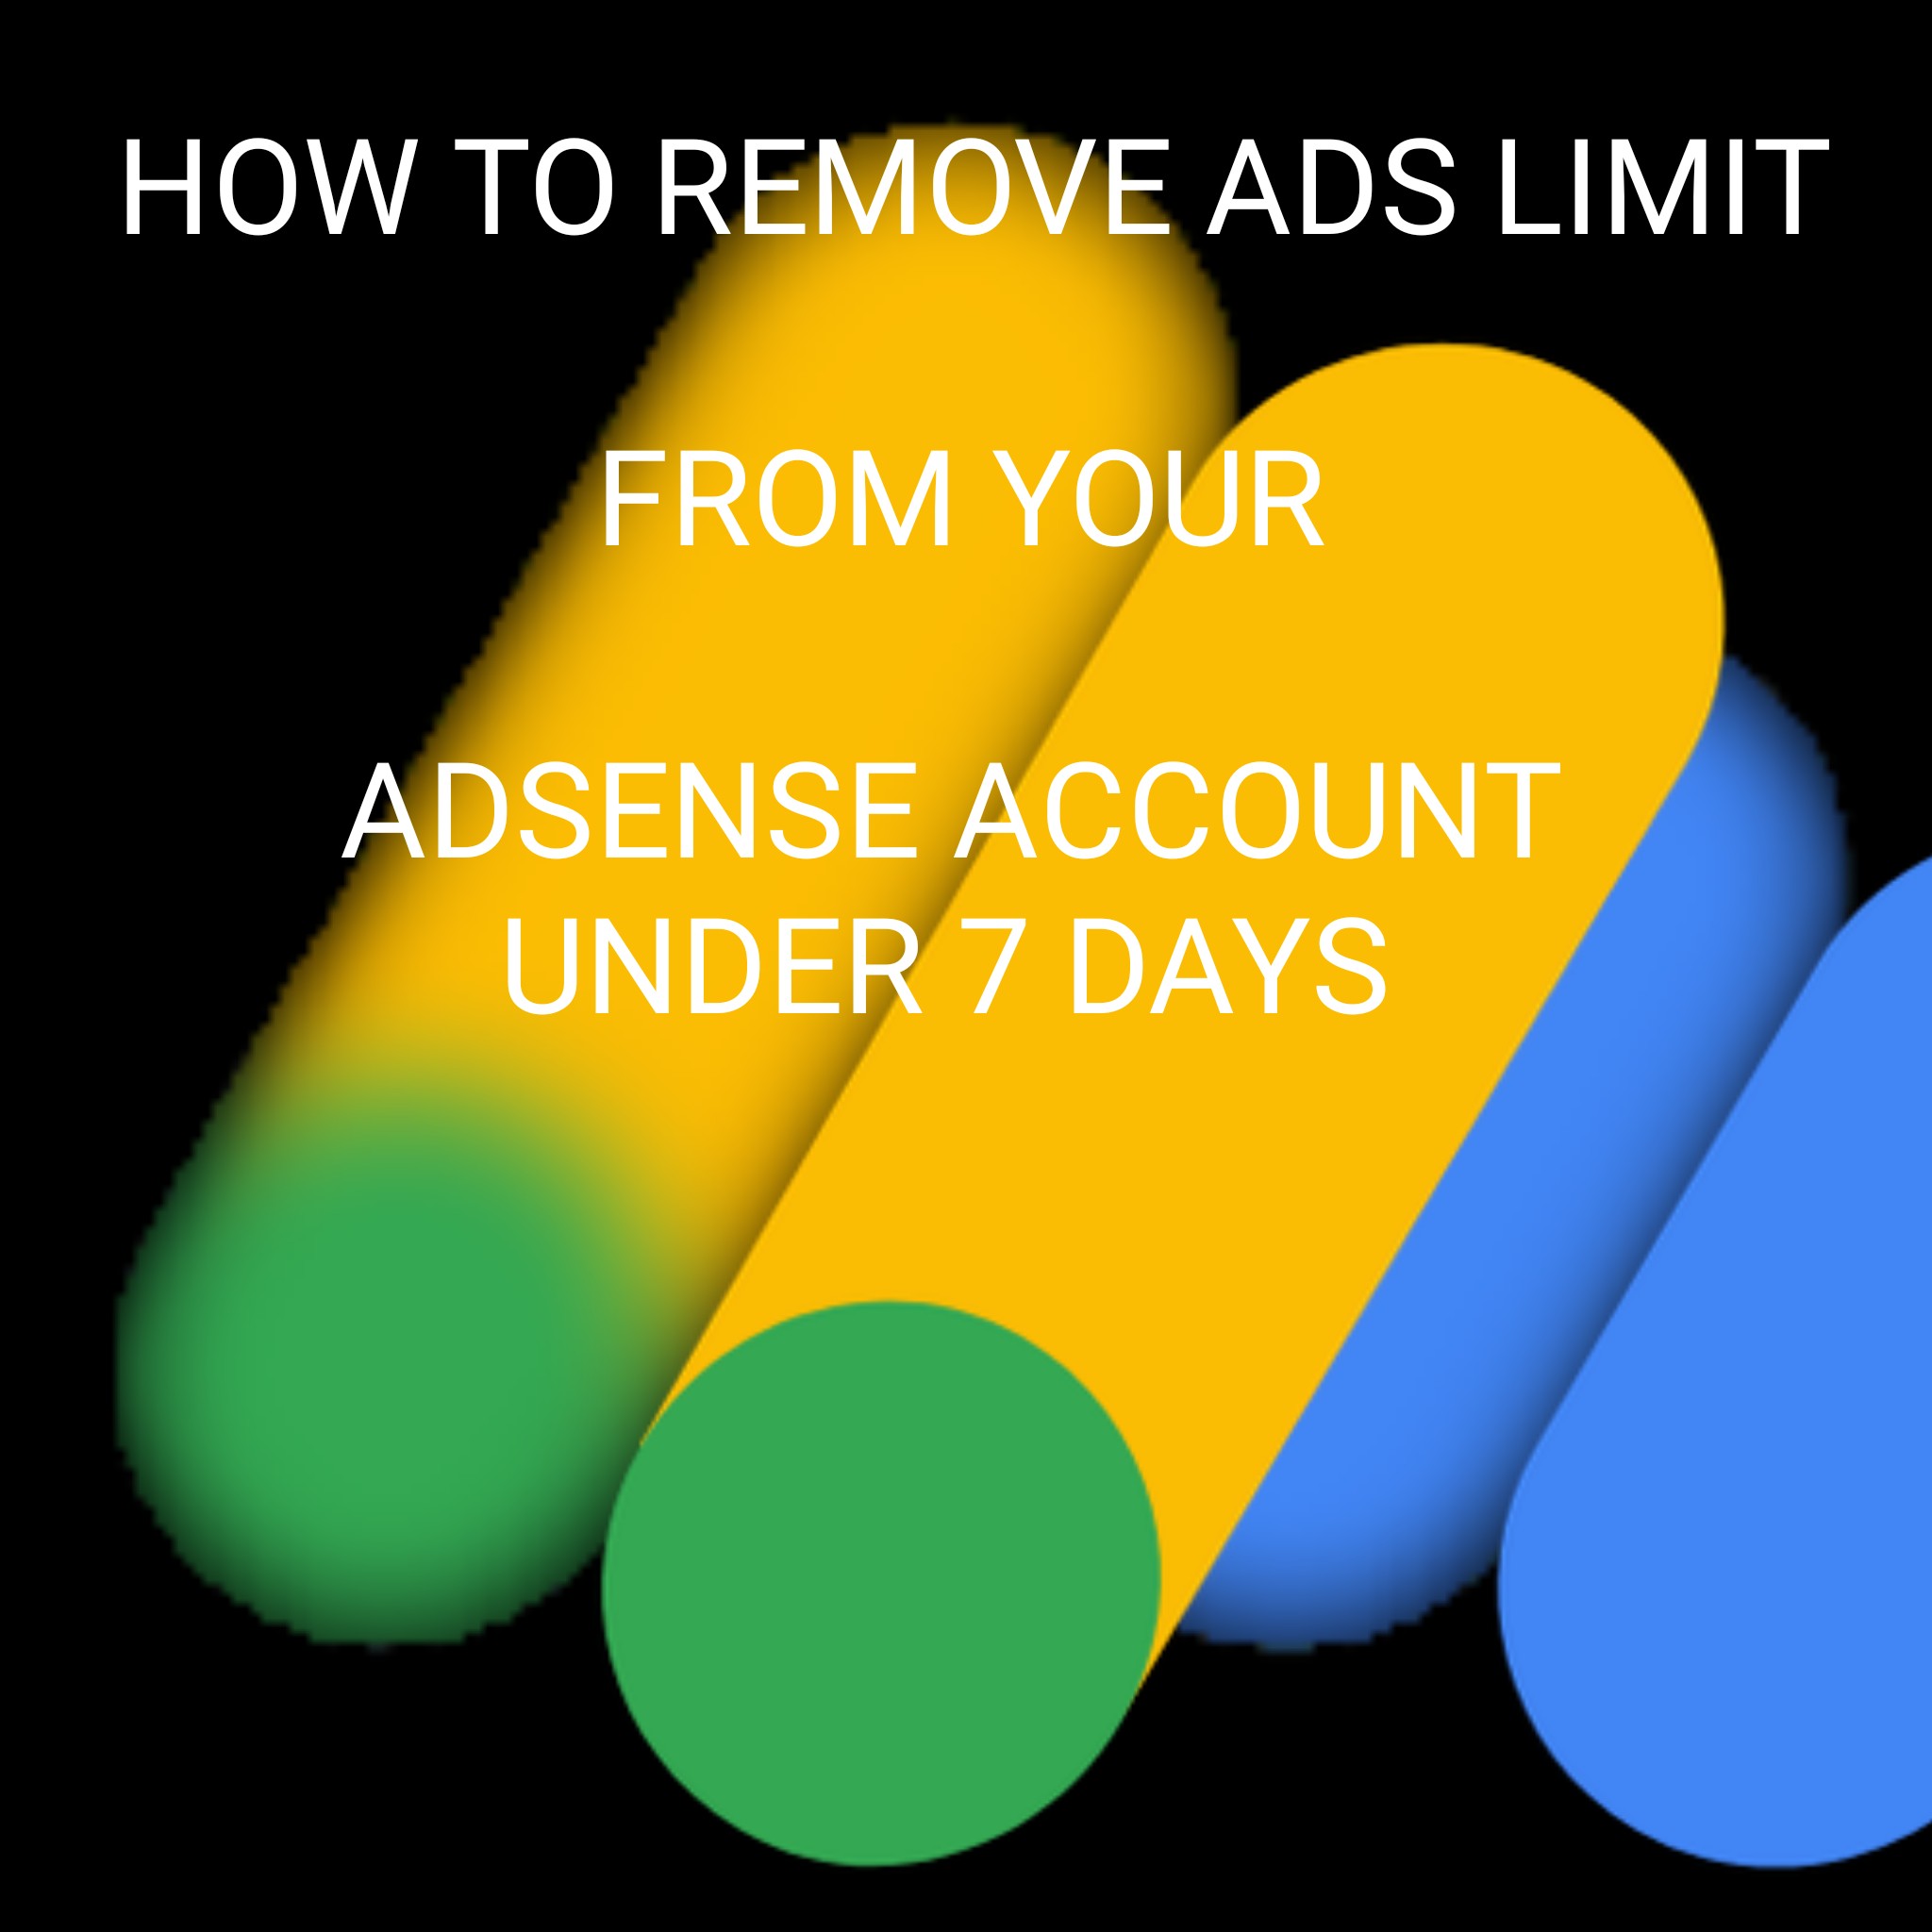 How to Remove Ads Limit From your Google Adsense Account Under 7 Days.